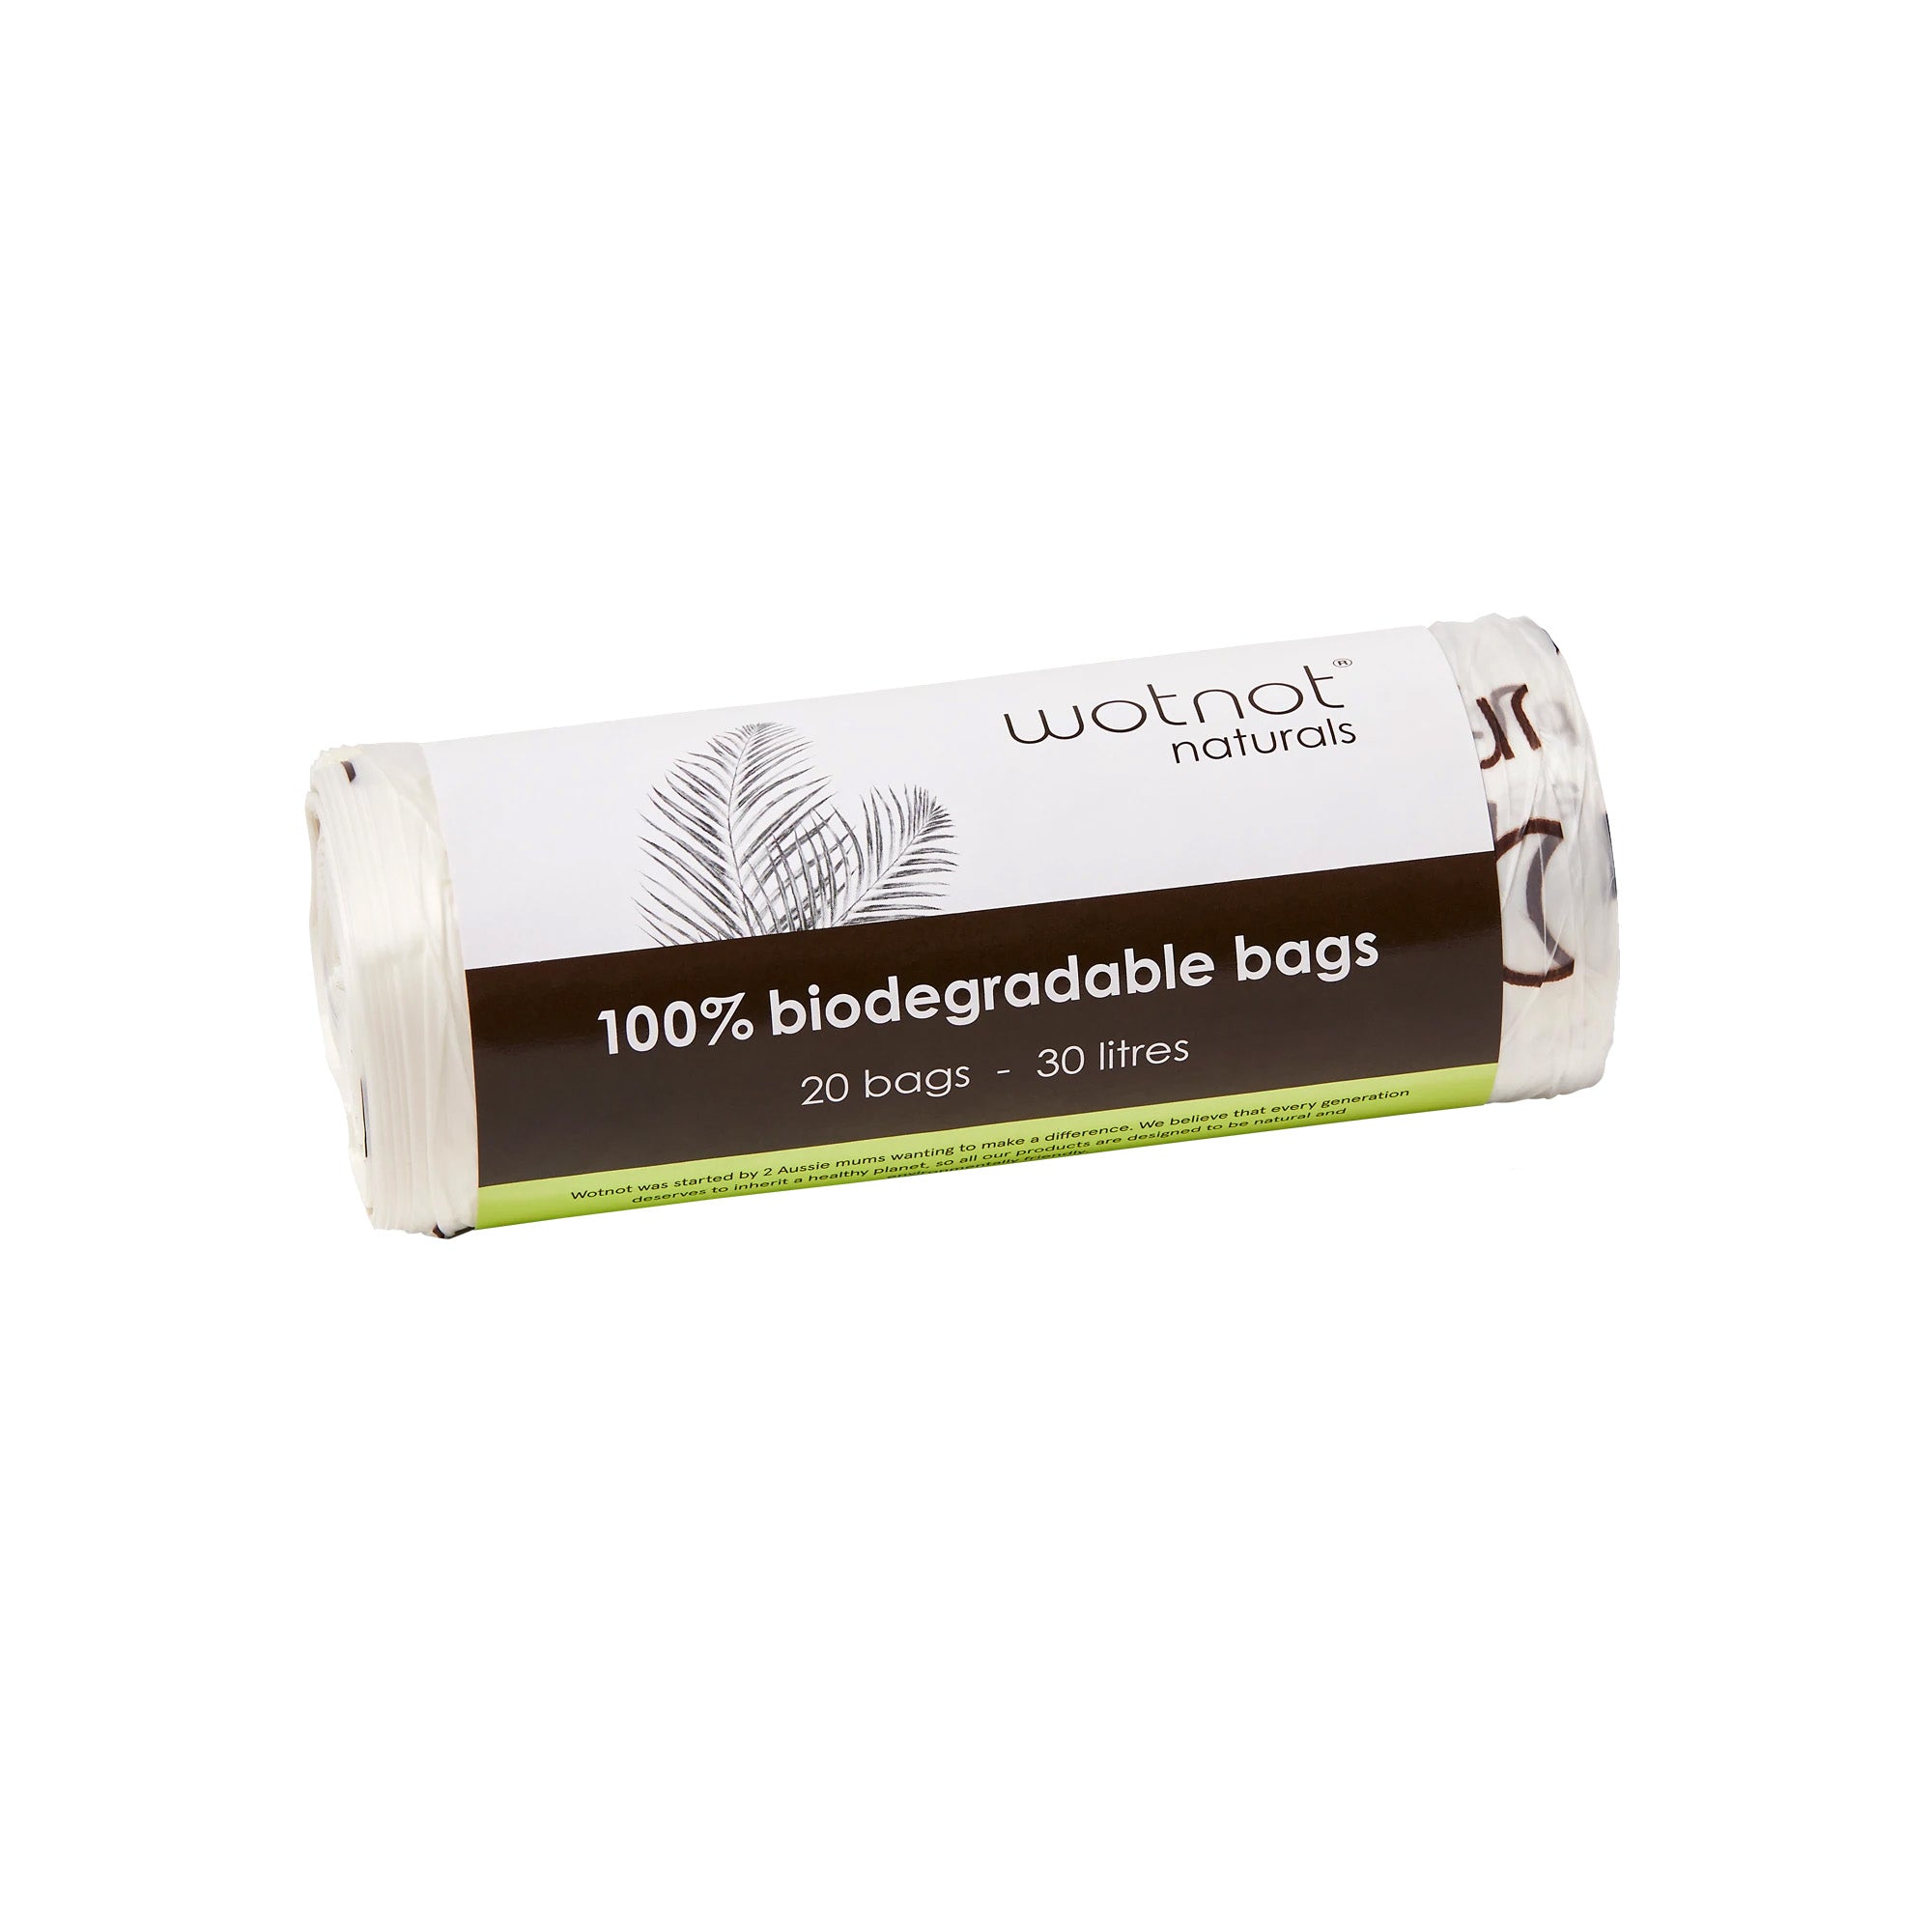 Wotnot Biodegradable Bags 30L 20-The Living Co.